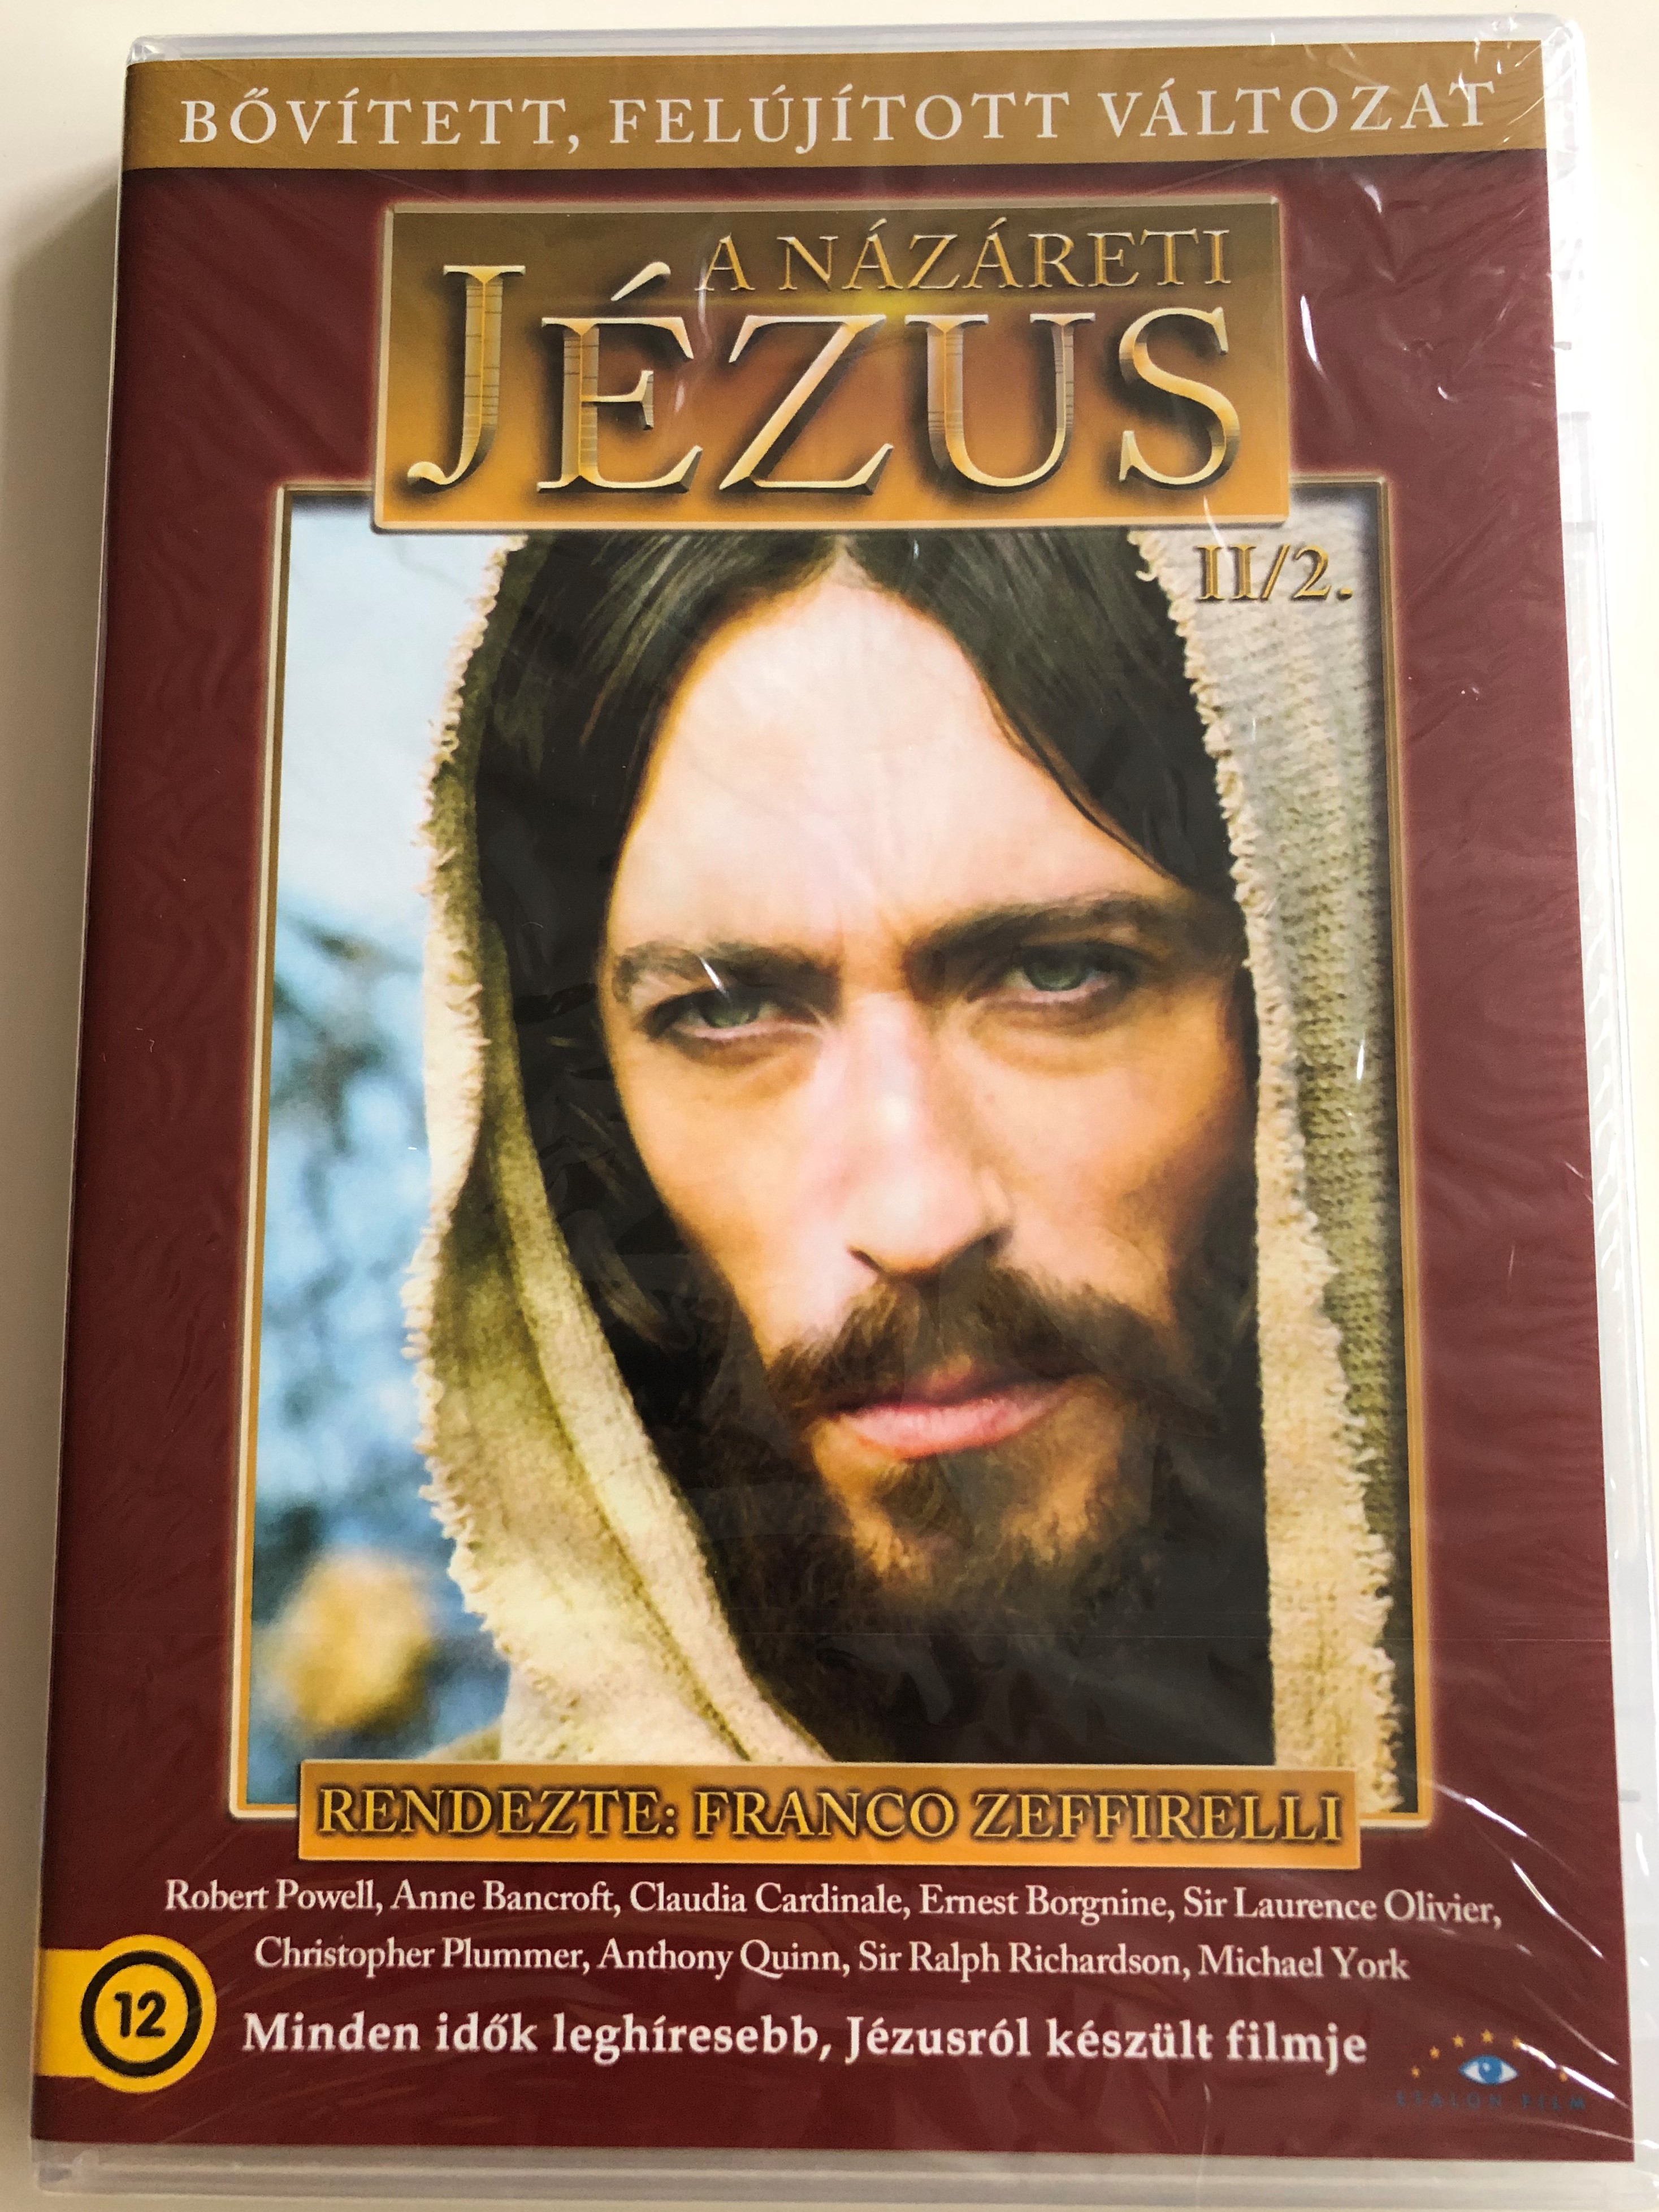 jesus-of-nazareth-ii2.-dvd-1977-a-n-z-reti-j-zus-directed-by-franco-zeffirelli-starring-robert-powell-anne-bancroft-claudia-cardinale-valentina-cortese-ian-mcshane-sir-laurence-olivier-extended-remastered-edition-1-.jpg